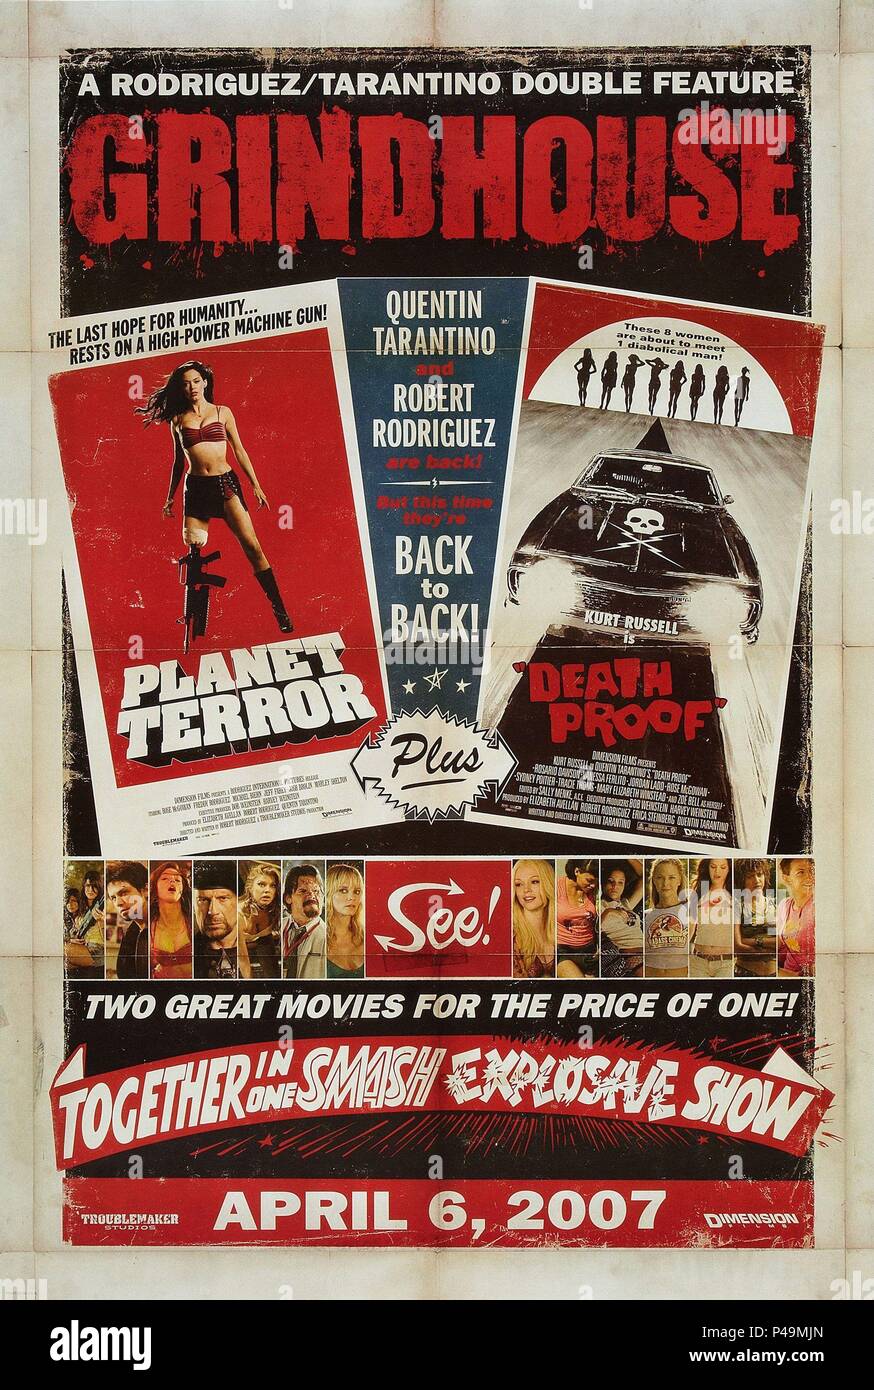 Original Film Title: GRINDHOUSE-DEATH PROOF.  English Title: GRINDHOUSE.  Film Director: QUENTIN TARANTINO.  Year: 2007. Credit: DIMENSION FILMS/A BAND APART/BIG TALK PRODUCTIONS/DARTMOUTH / Album Stock Photo